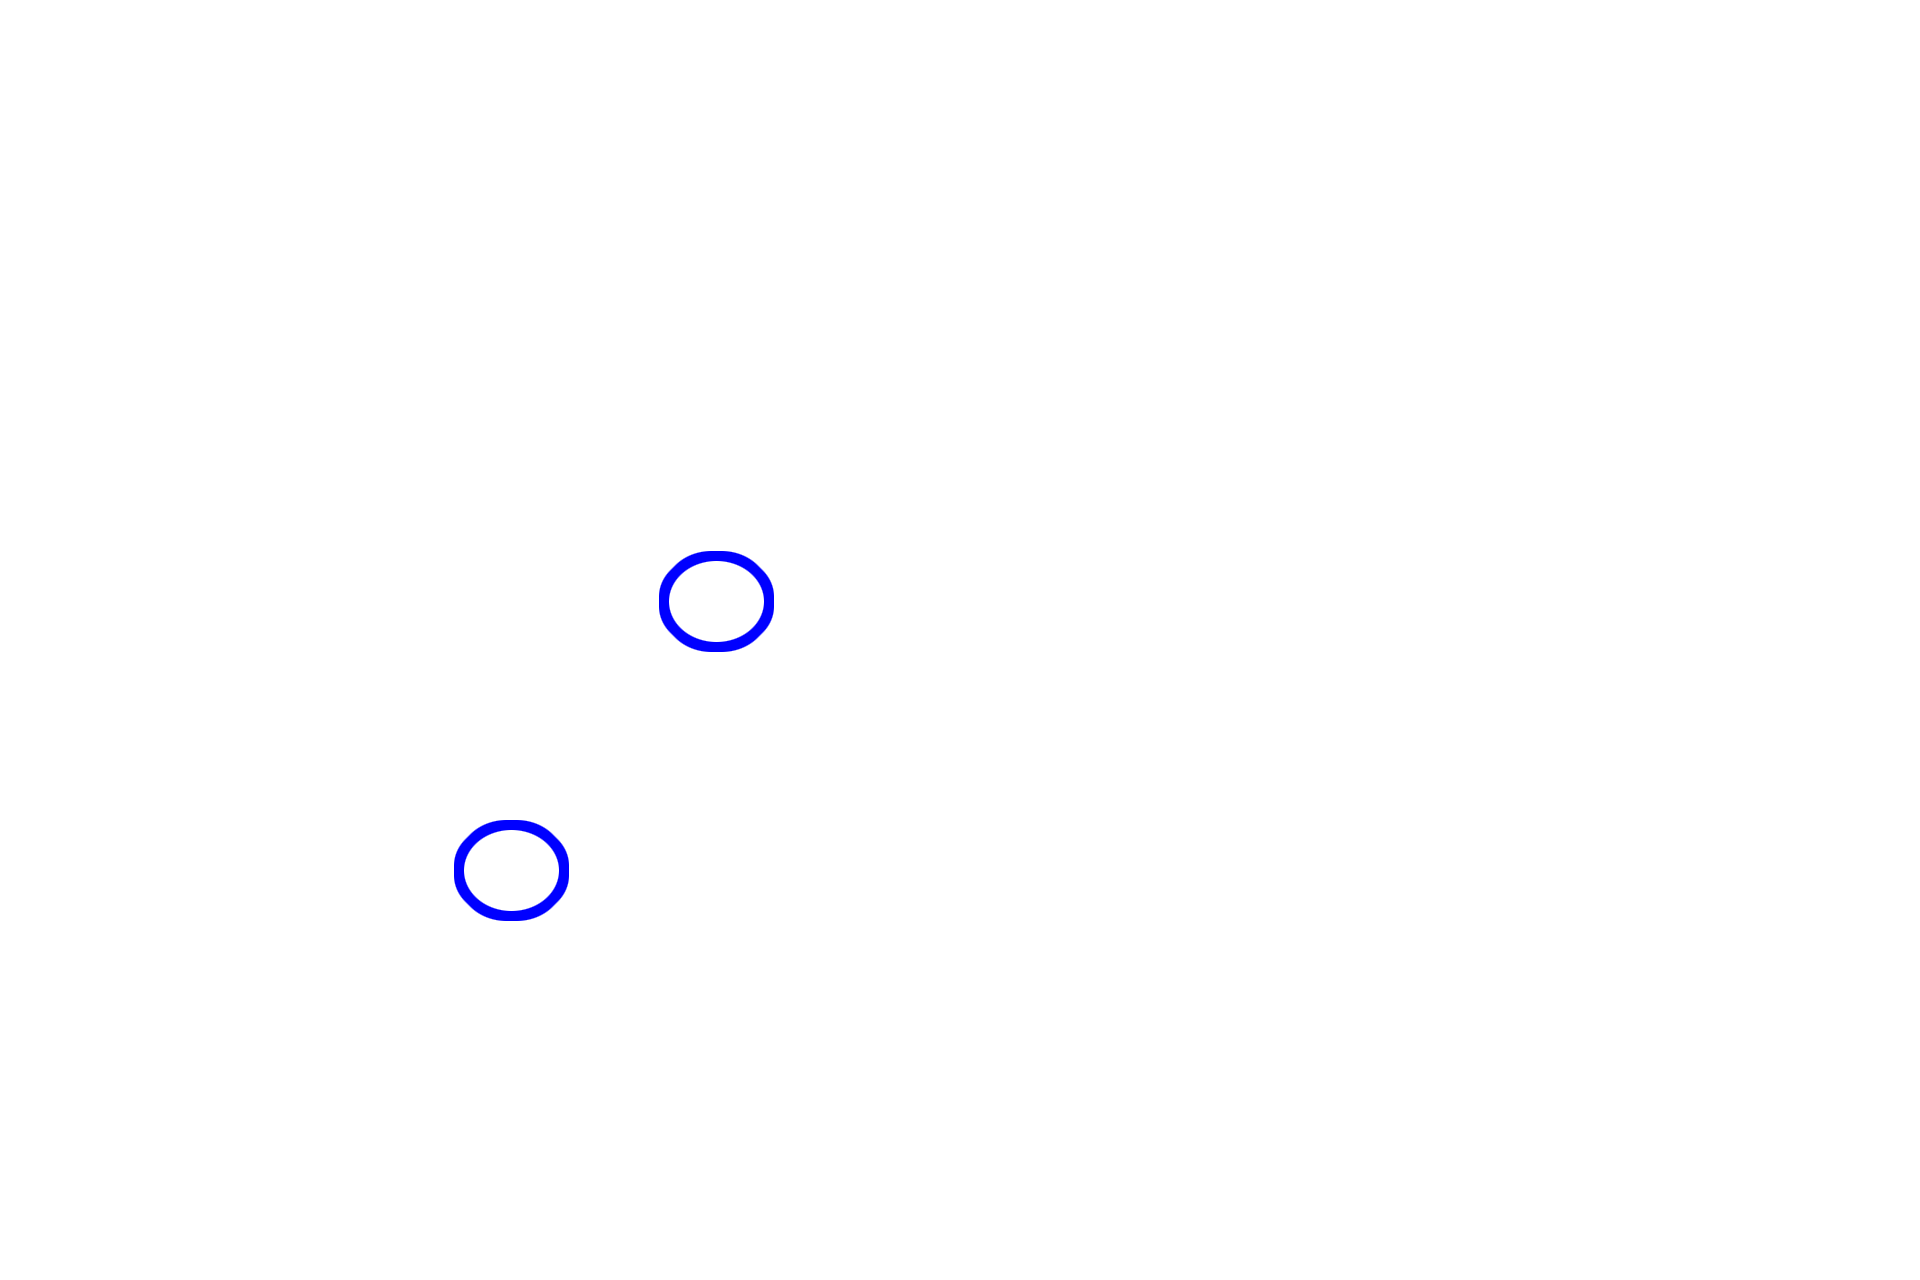 Nucleoli <p>During telophase, the nuclear envelope and nucleoli reform, and the chromosomal DNA decondenses.  The developing cleavage furrow indicates the division of the cytoplasm (cytokinesis) and the formation of identical daughter cells.</p>
